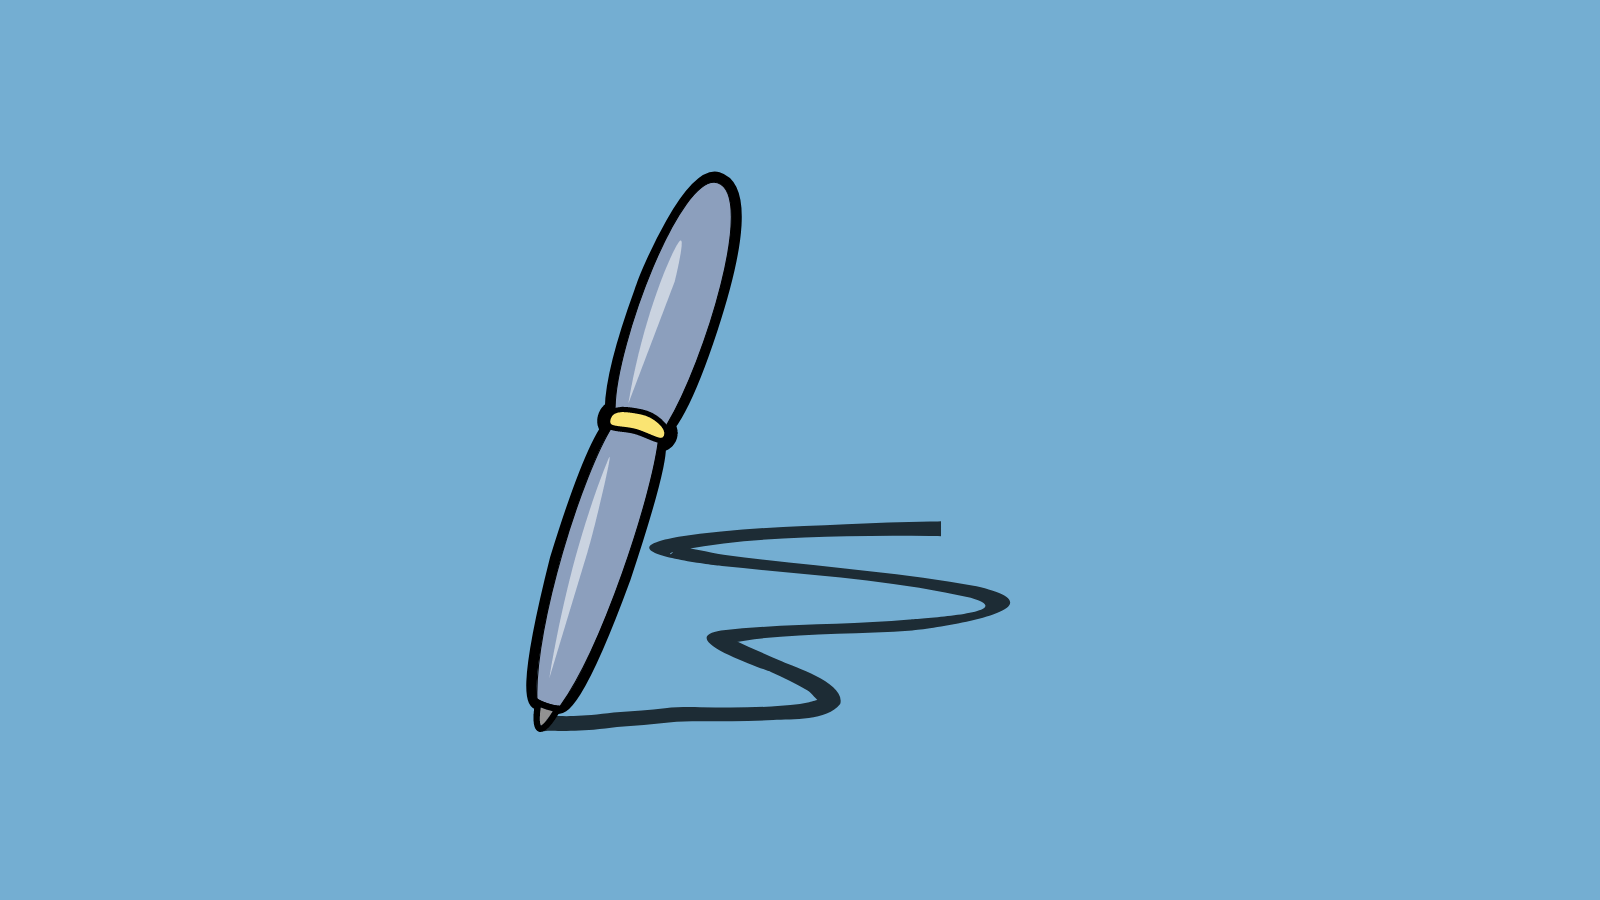 A pen drawing a wiggly line